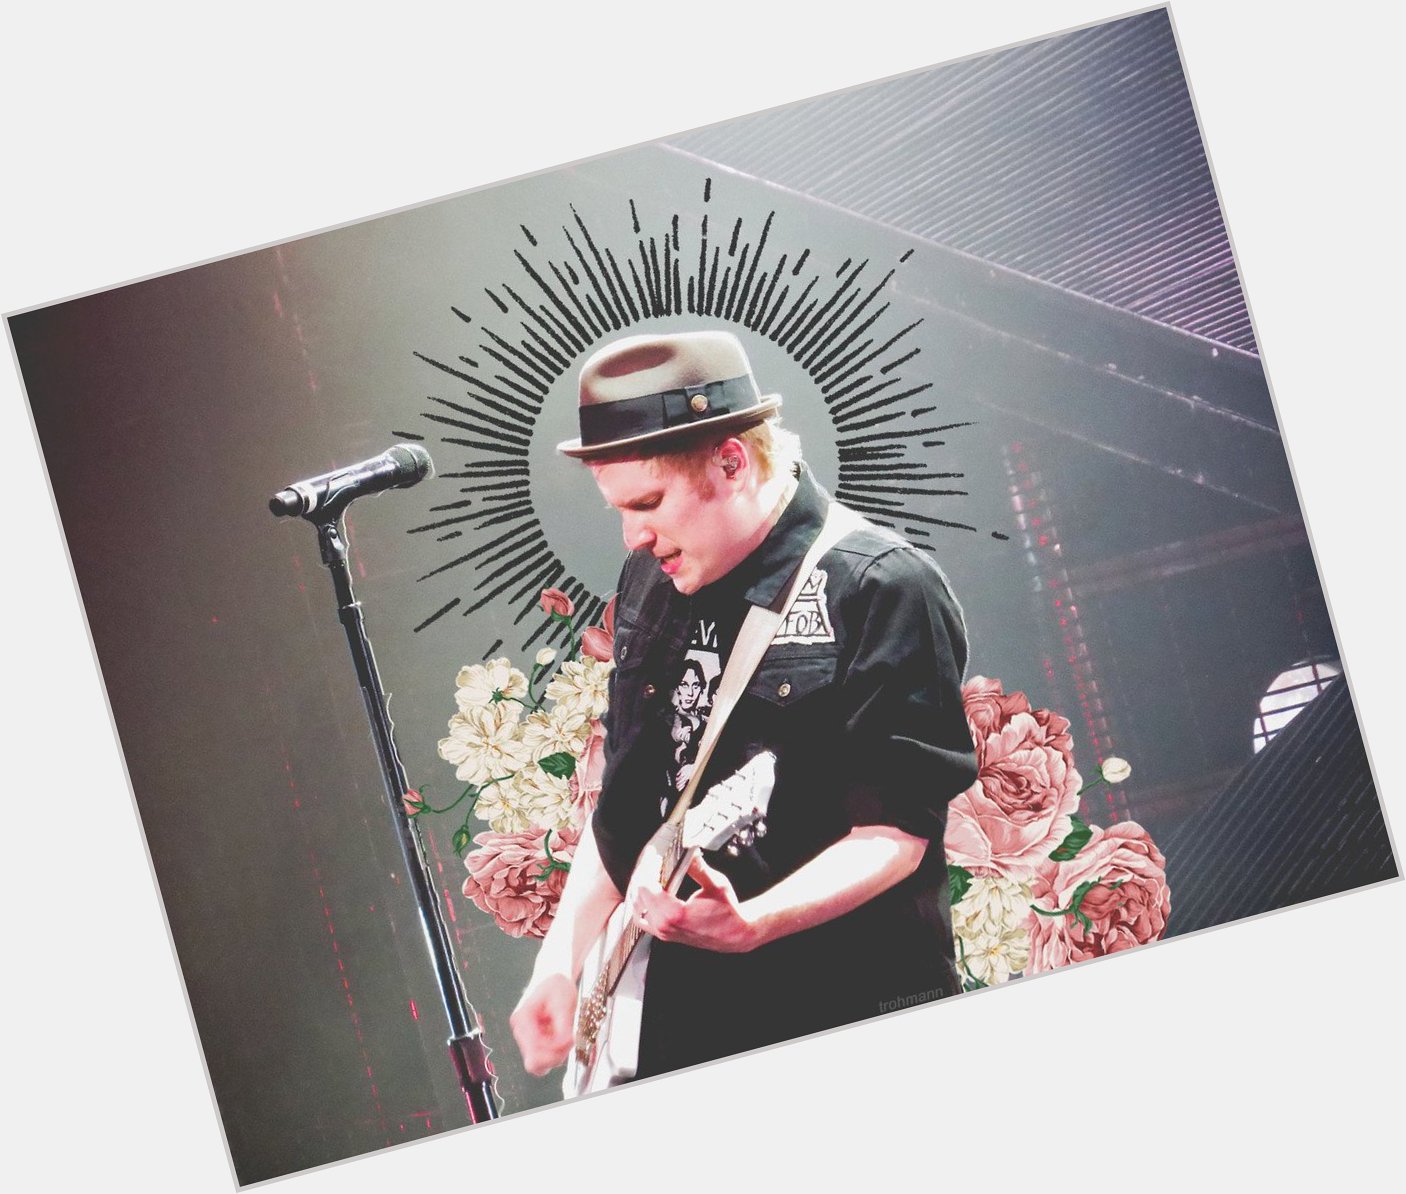 Today is a good day. Today is the Birthday of someone really special. Happy Birthday Patrick Stump 